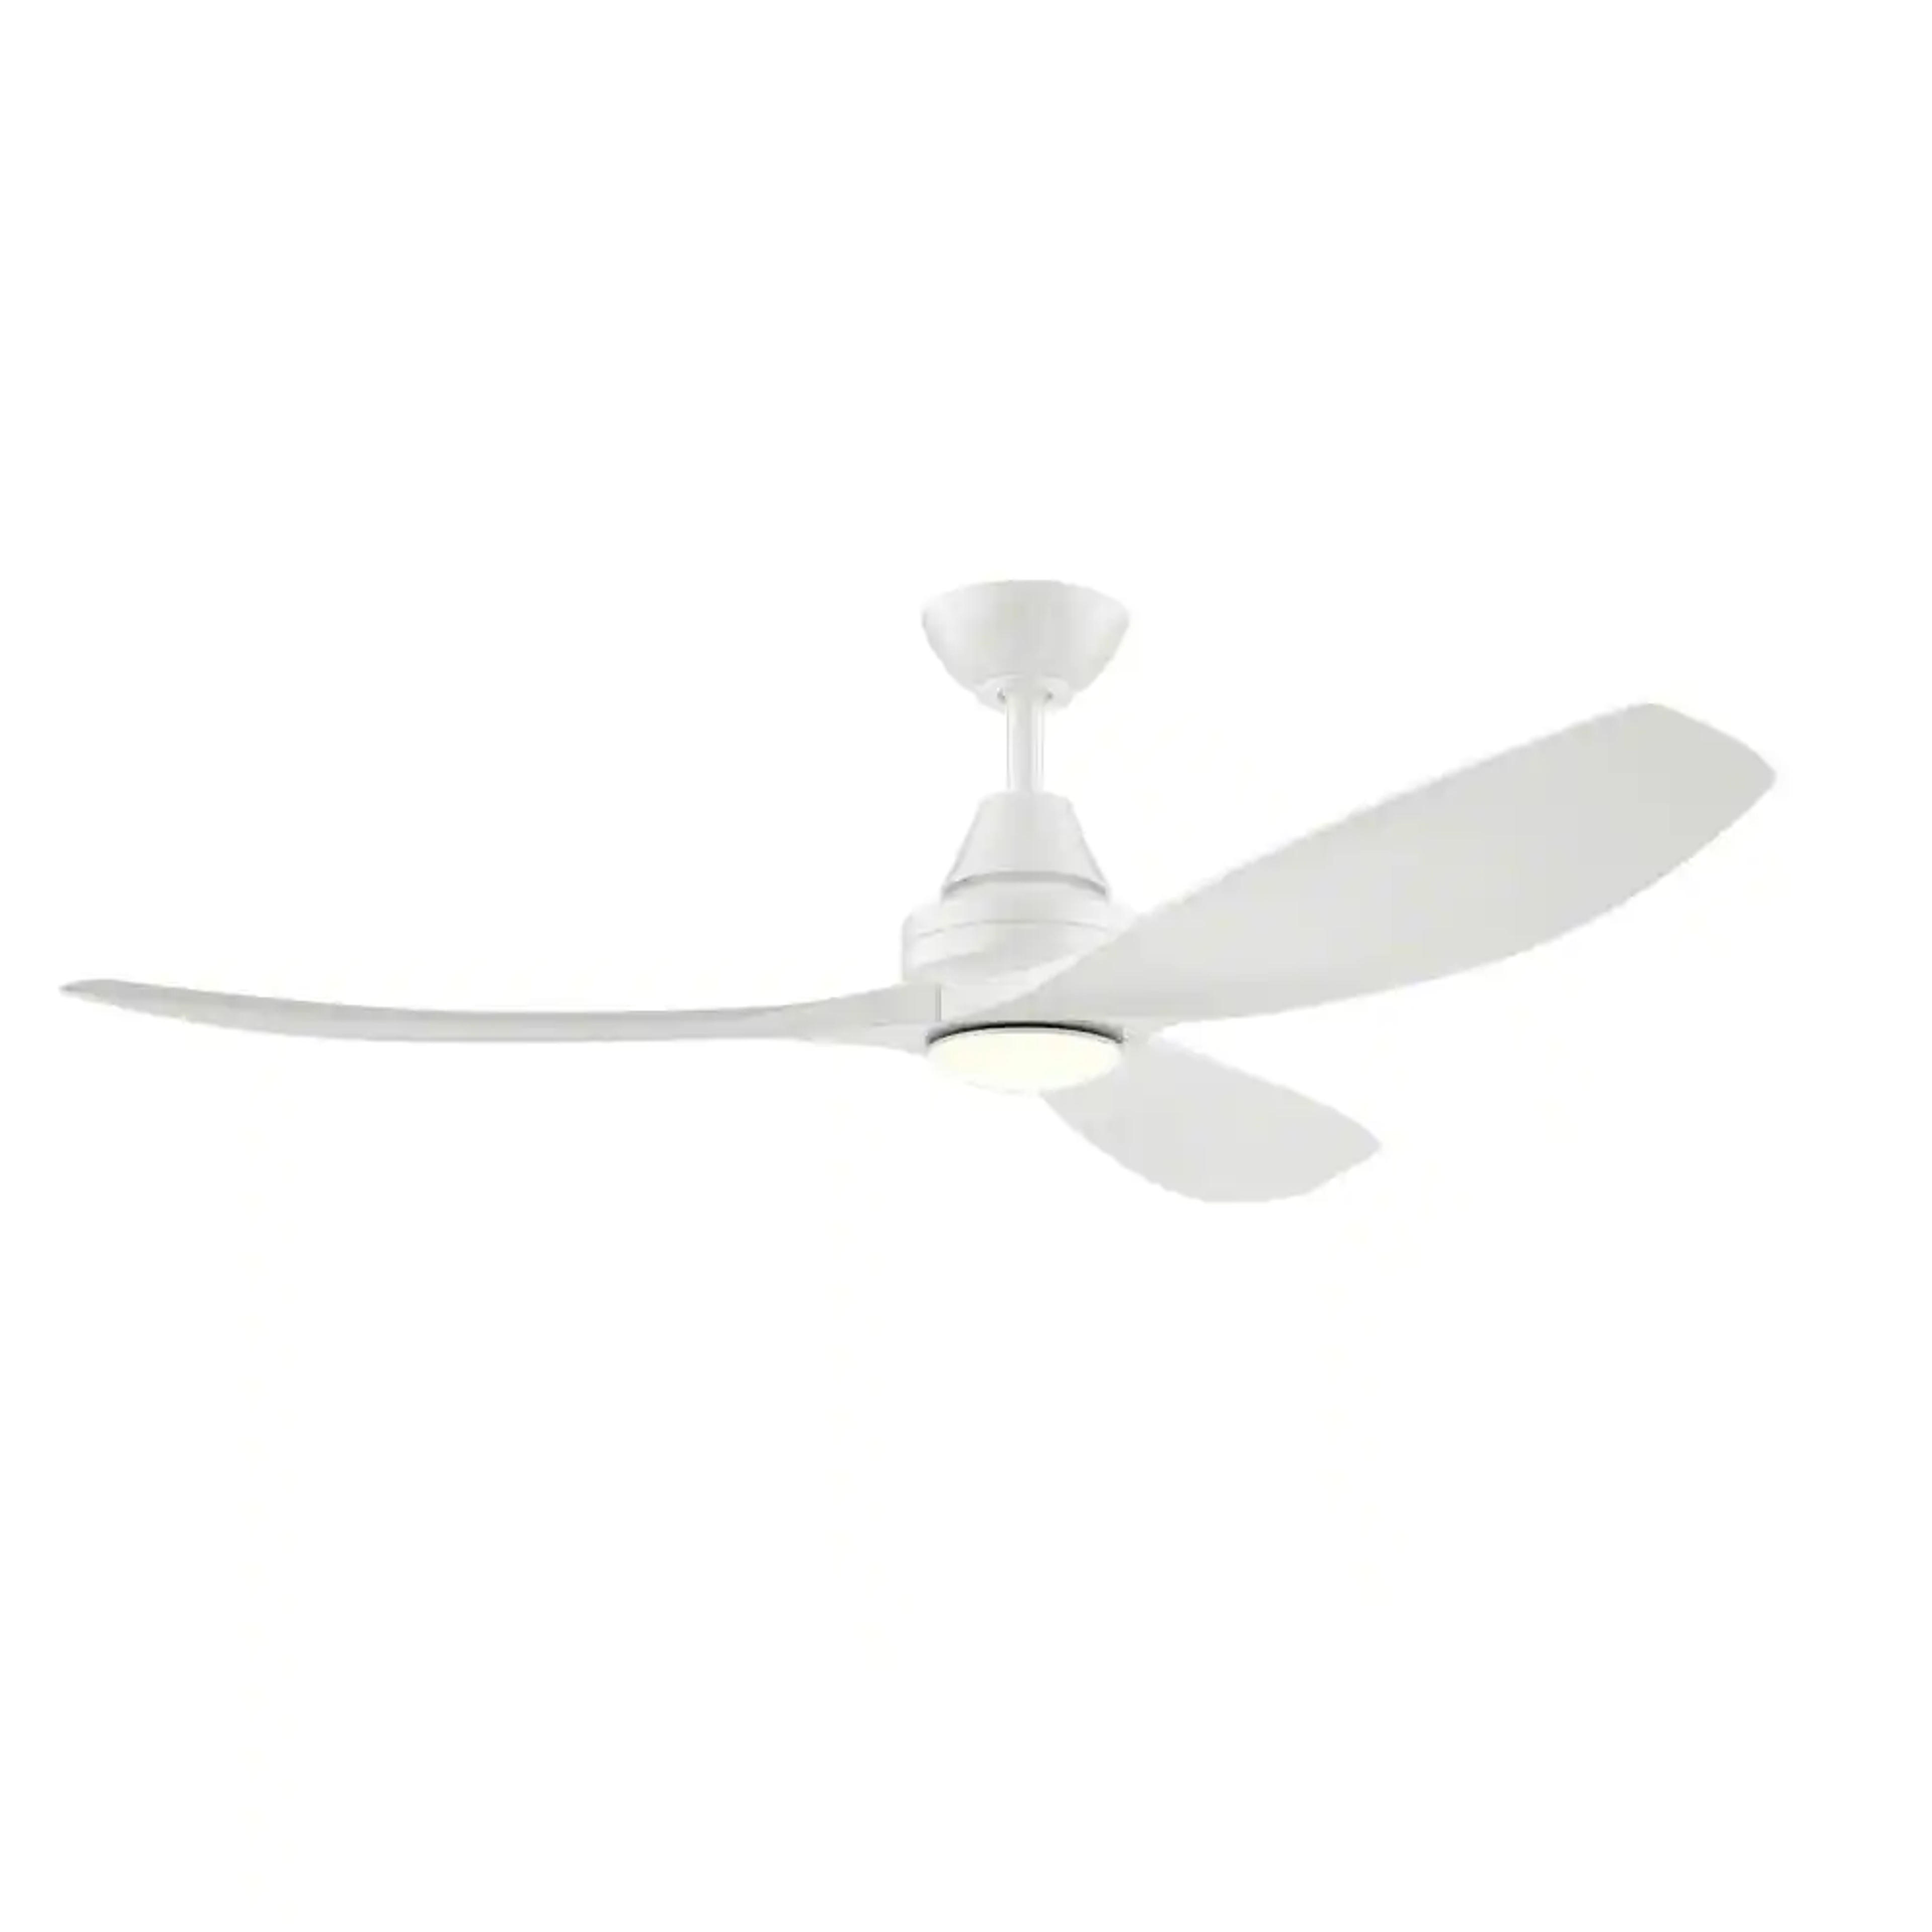 Home Decorators Collection Levanto 52 in. LED Indoor/Outdoor White Ceiling Fan with Light 34602